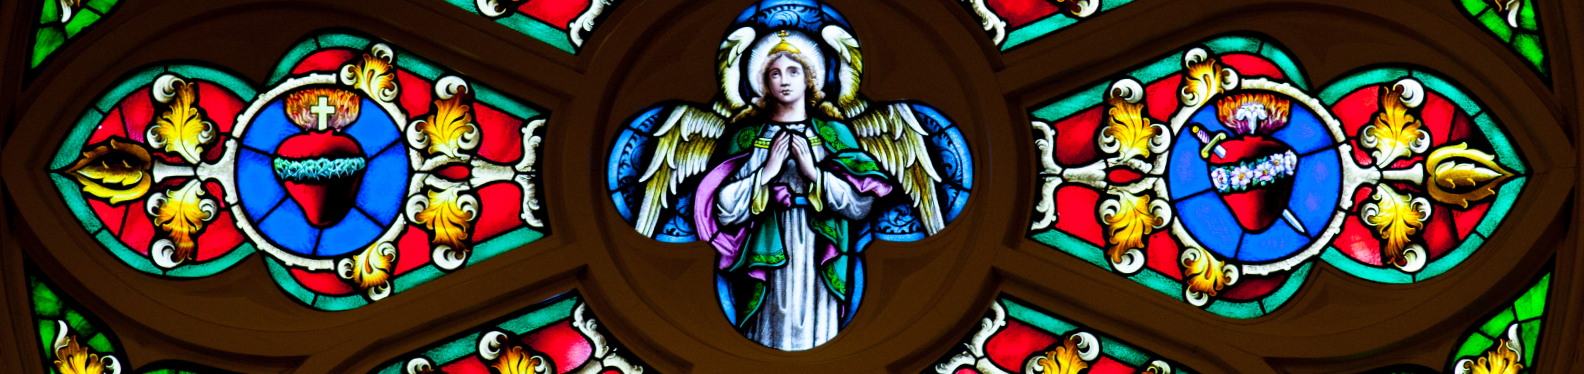 Rose Window featuring a detail of St. Michael and the Sacred Heart